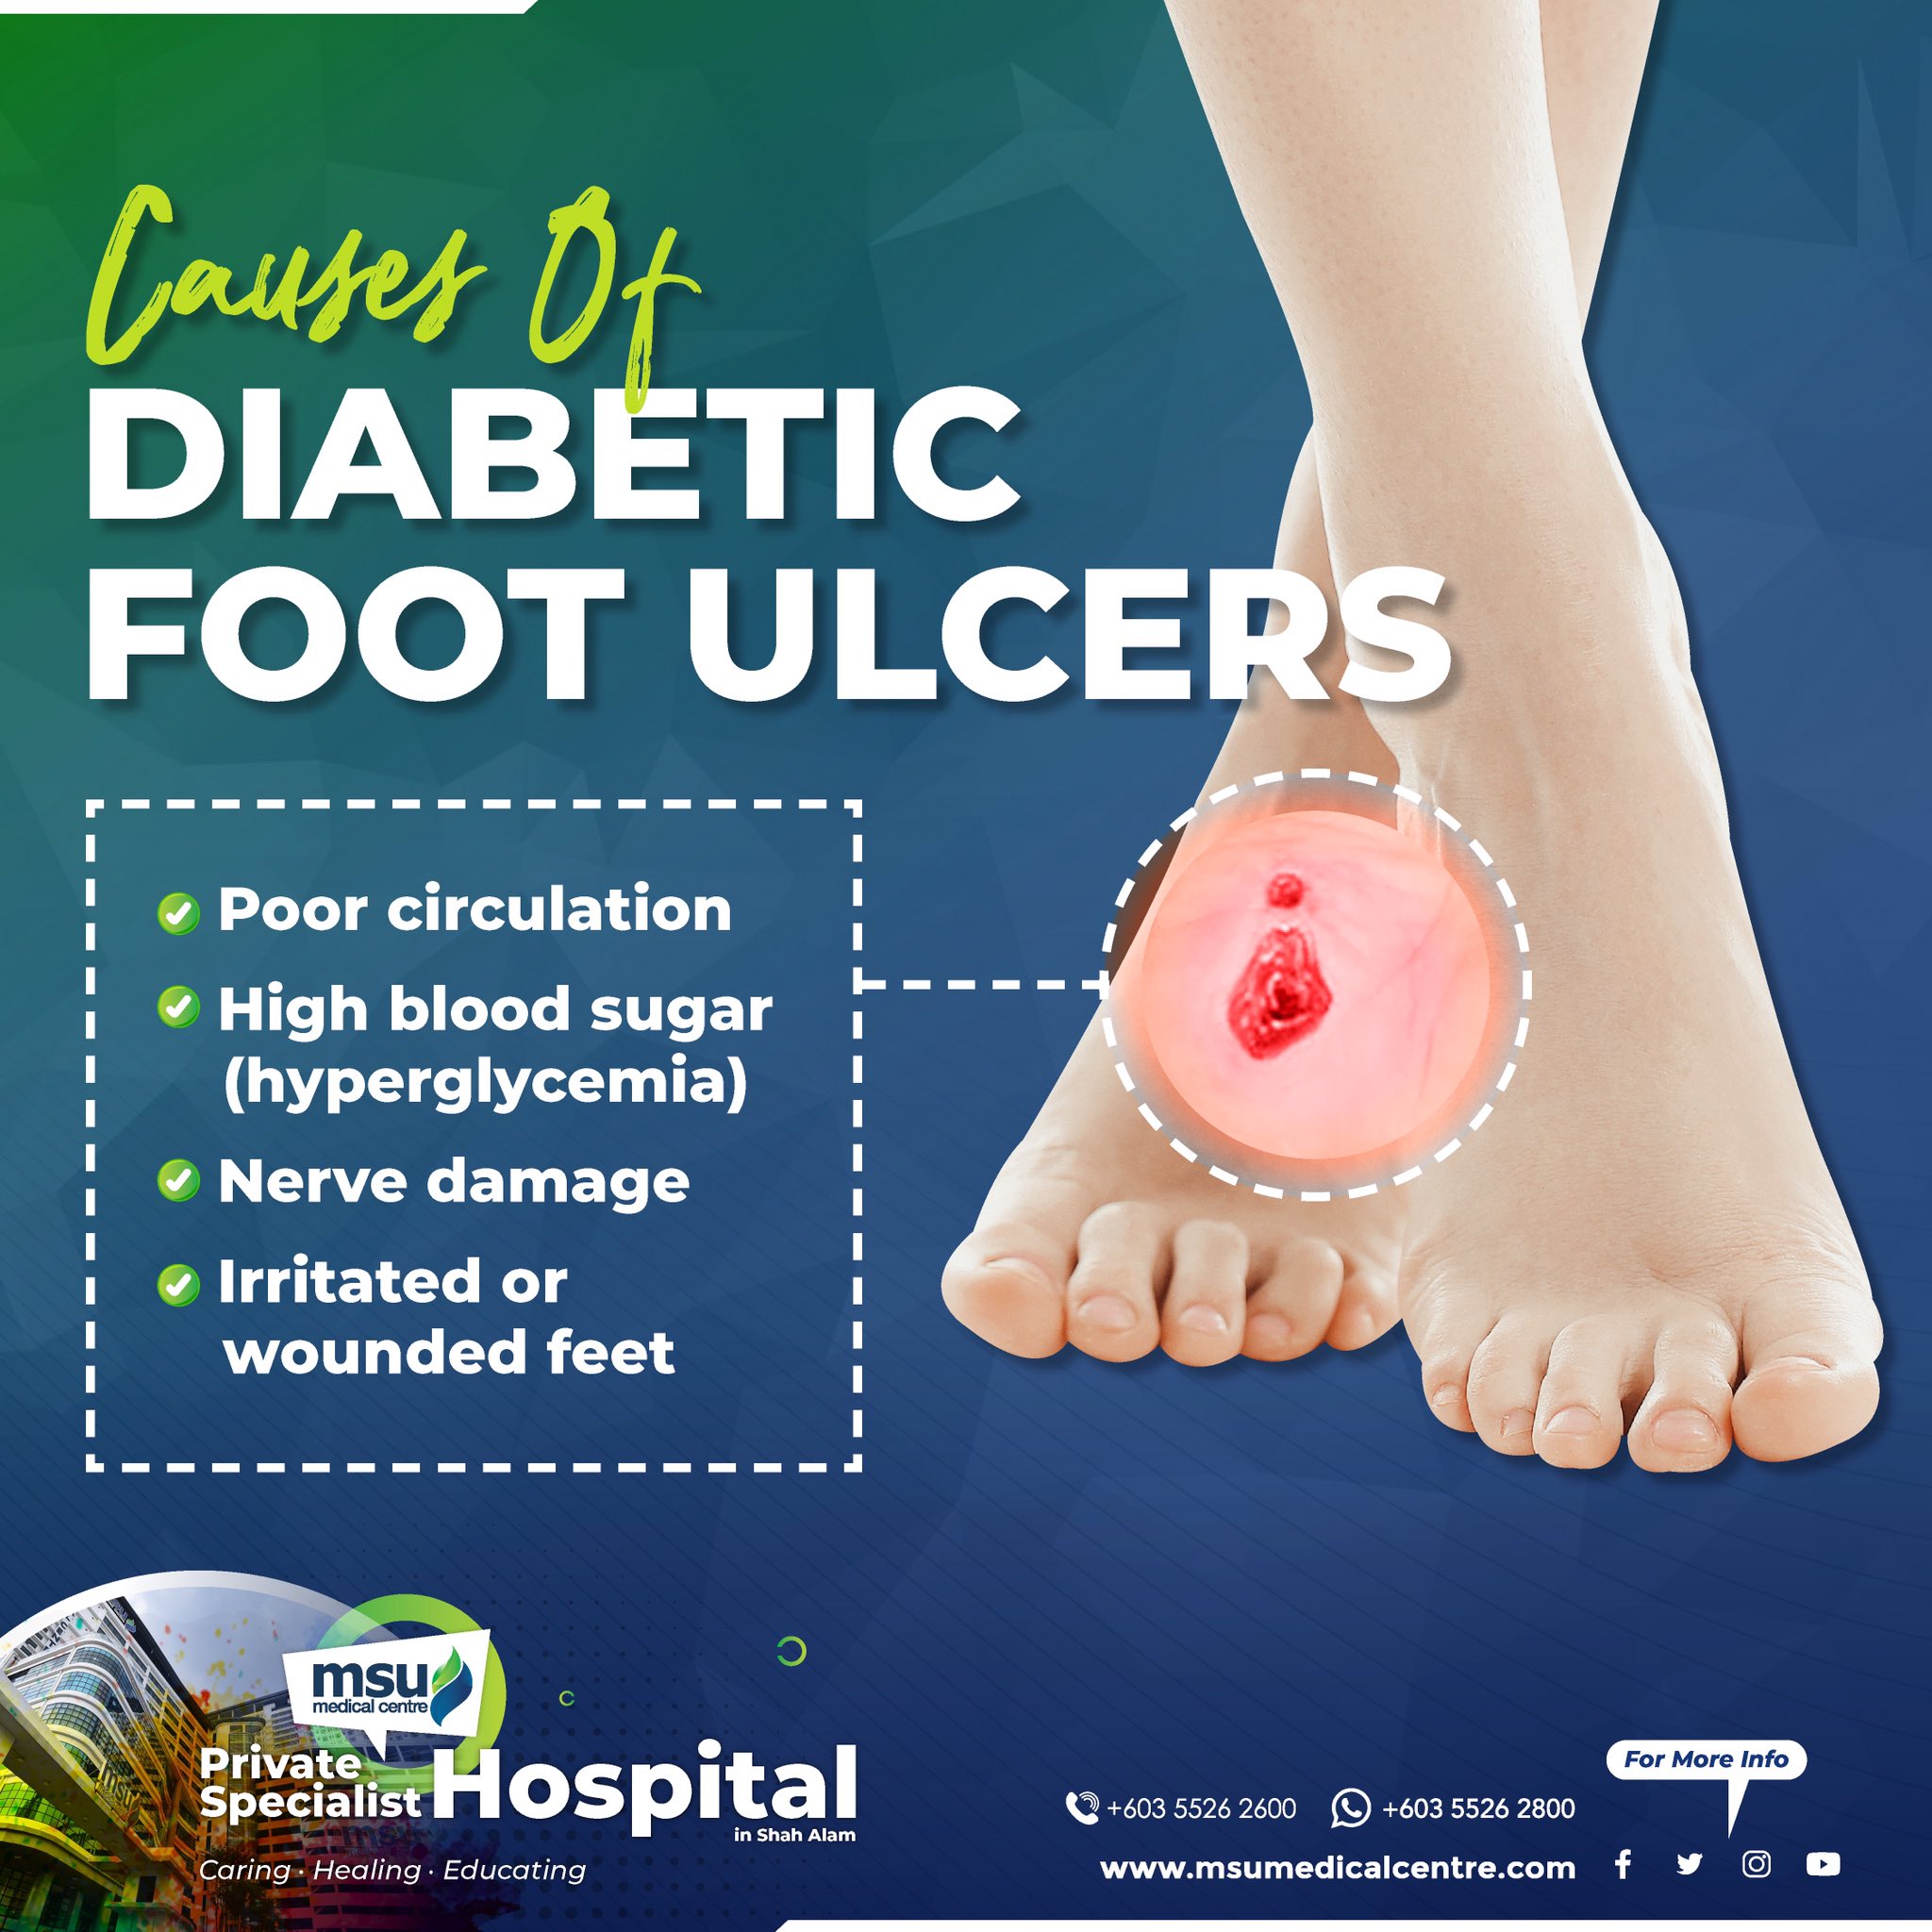 Diabetic Foot Ulcer Stages - Atlanta Wound Doctor Explains